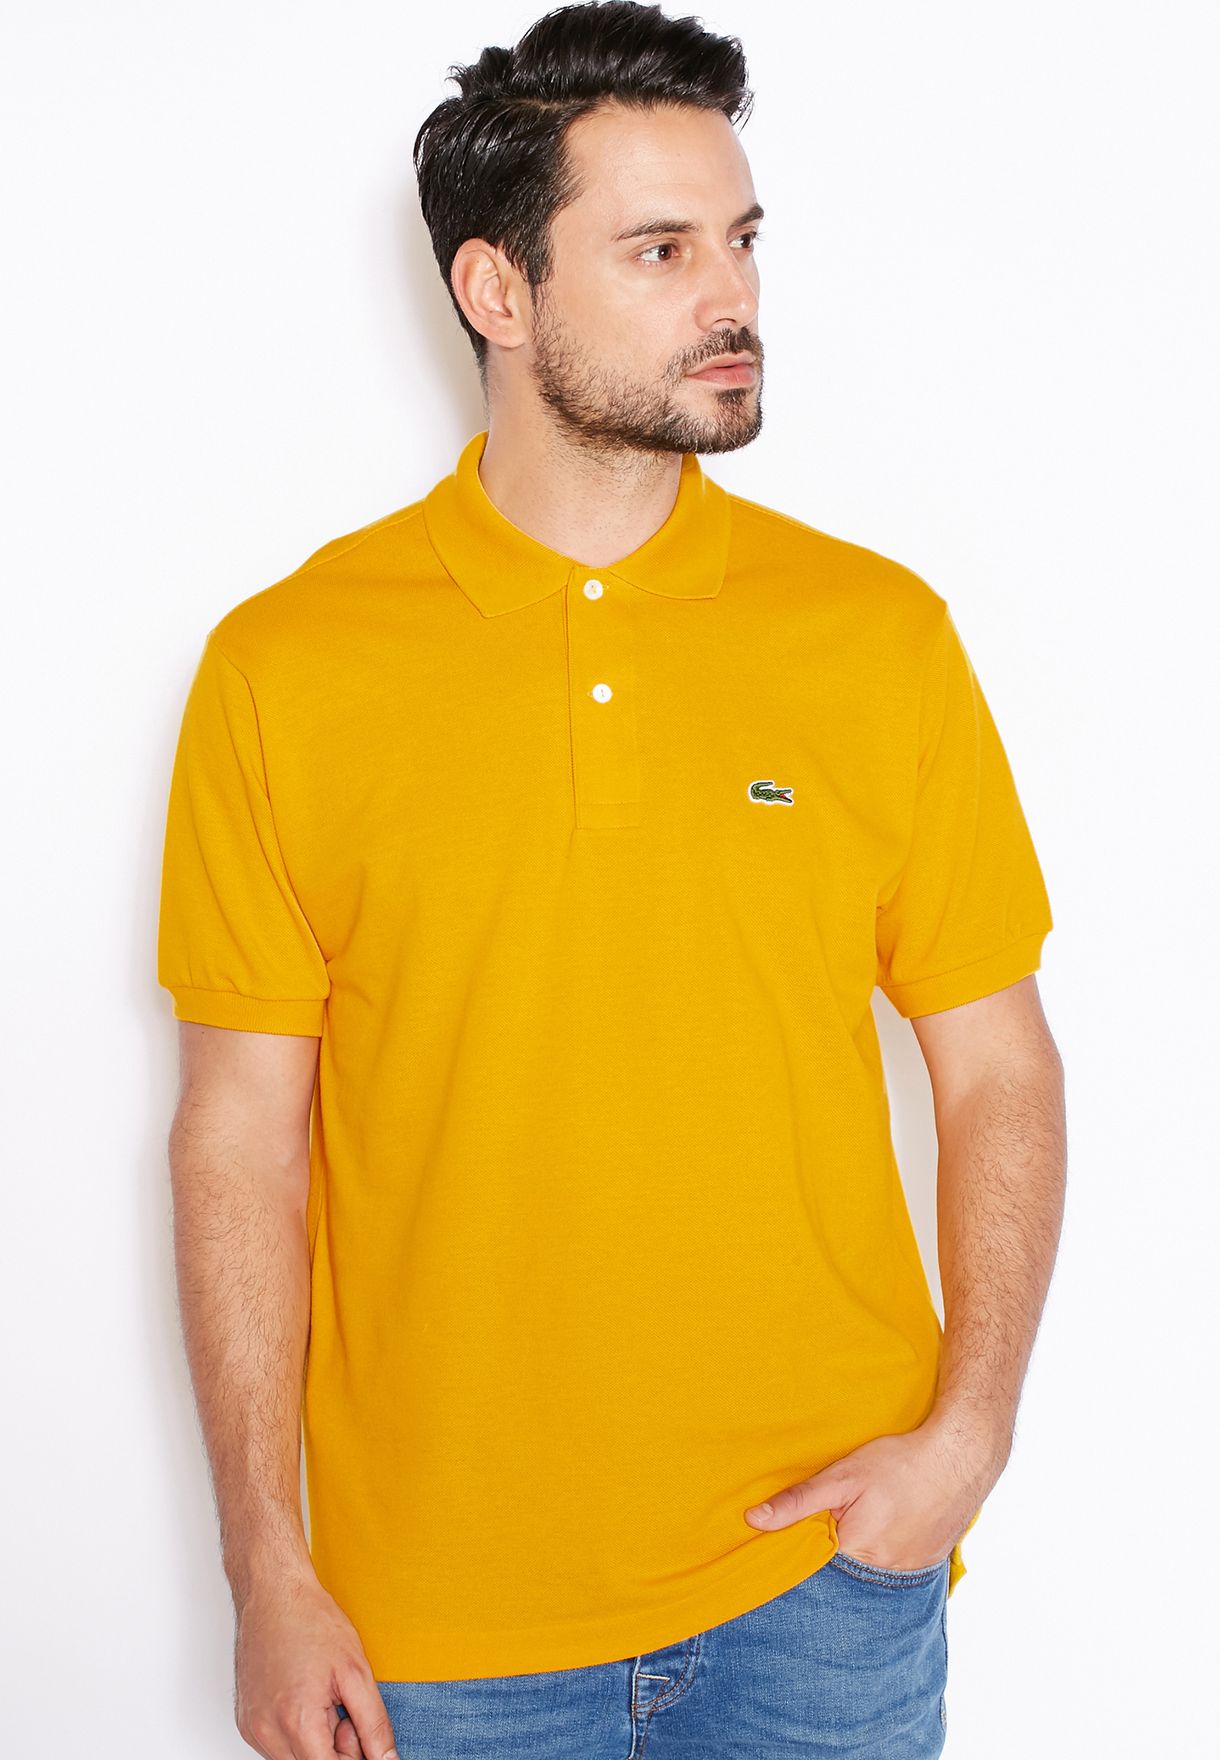 lacoste l1212 yellow